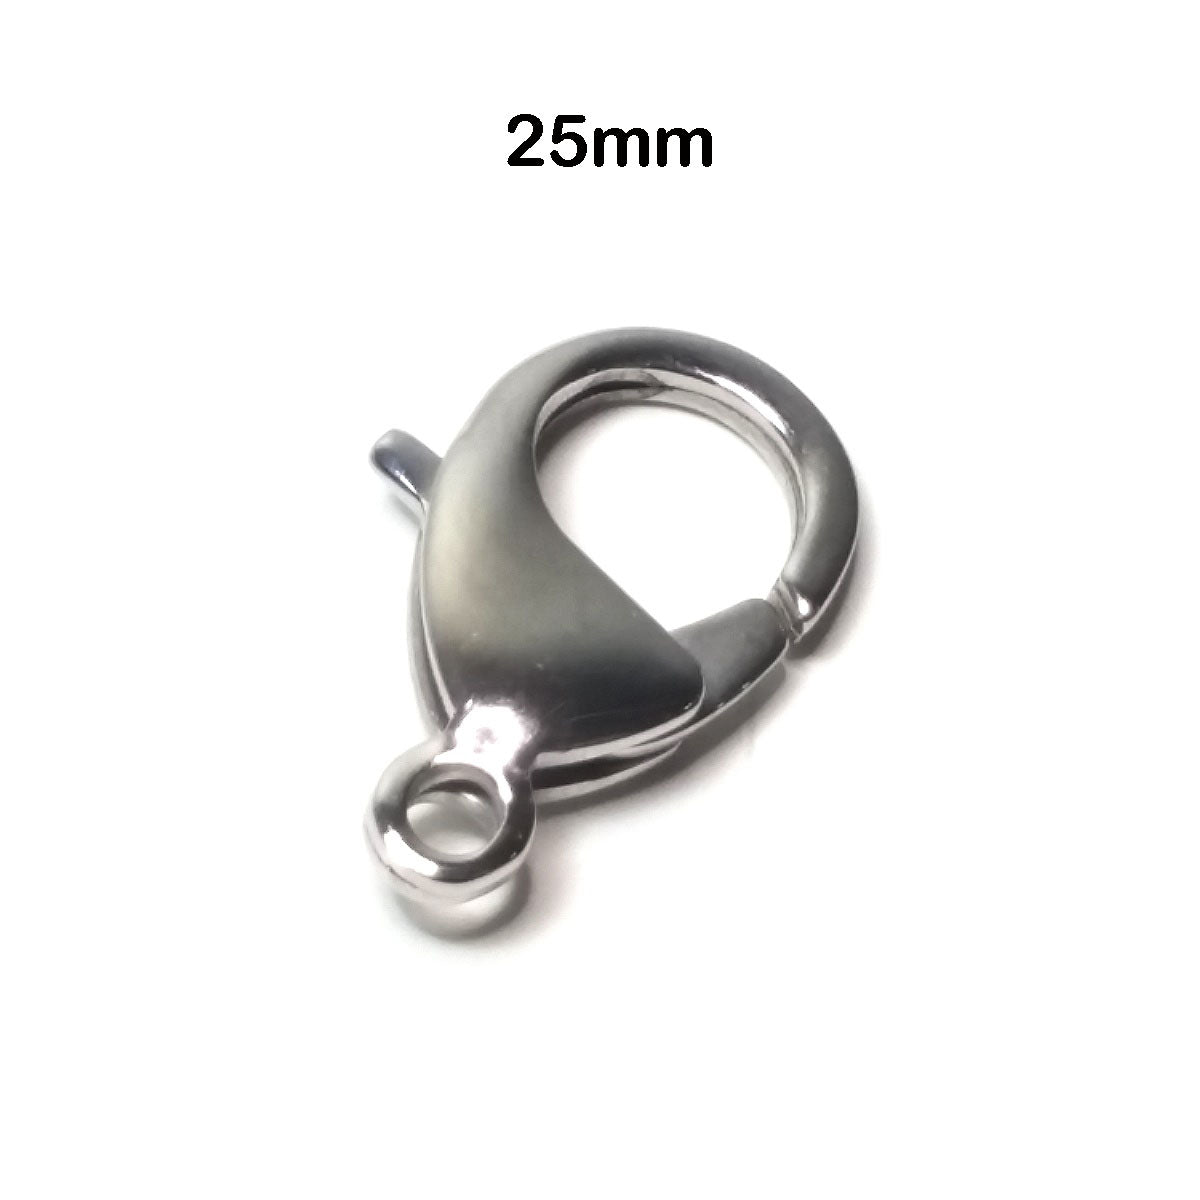 20PCS 13MM Lobster Clasps 316 Stainless Steel Lobster Claw Clasps